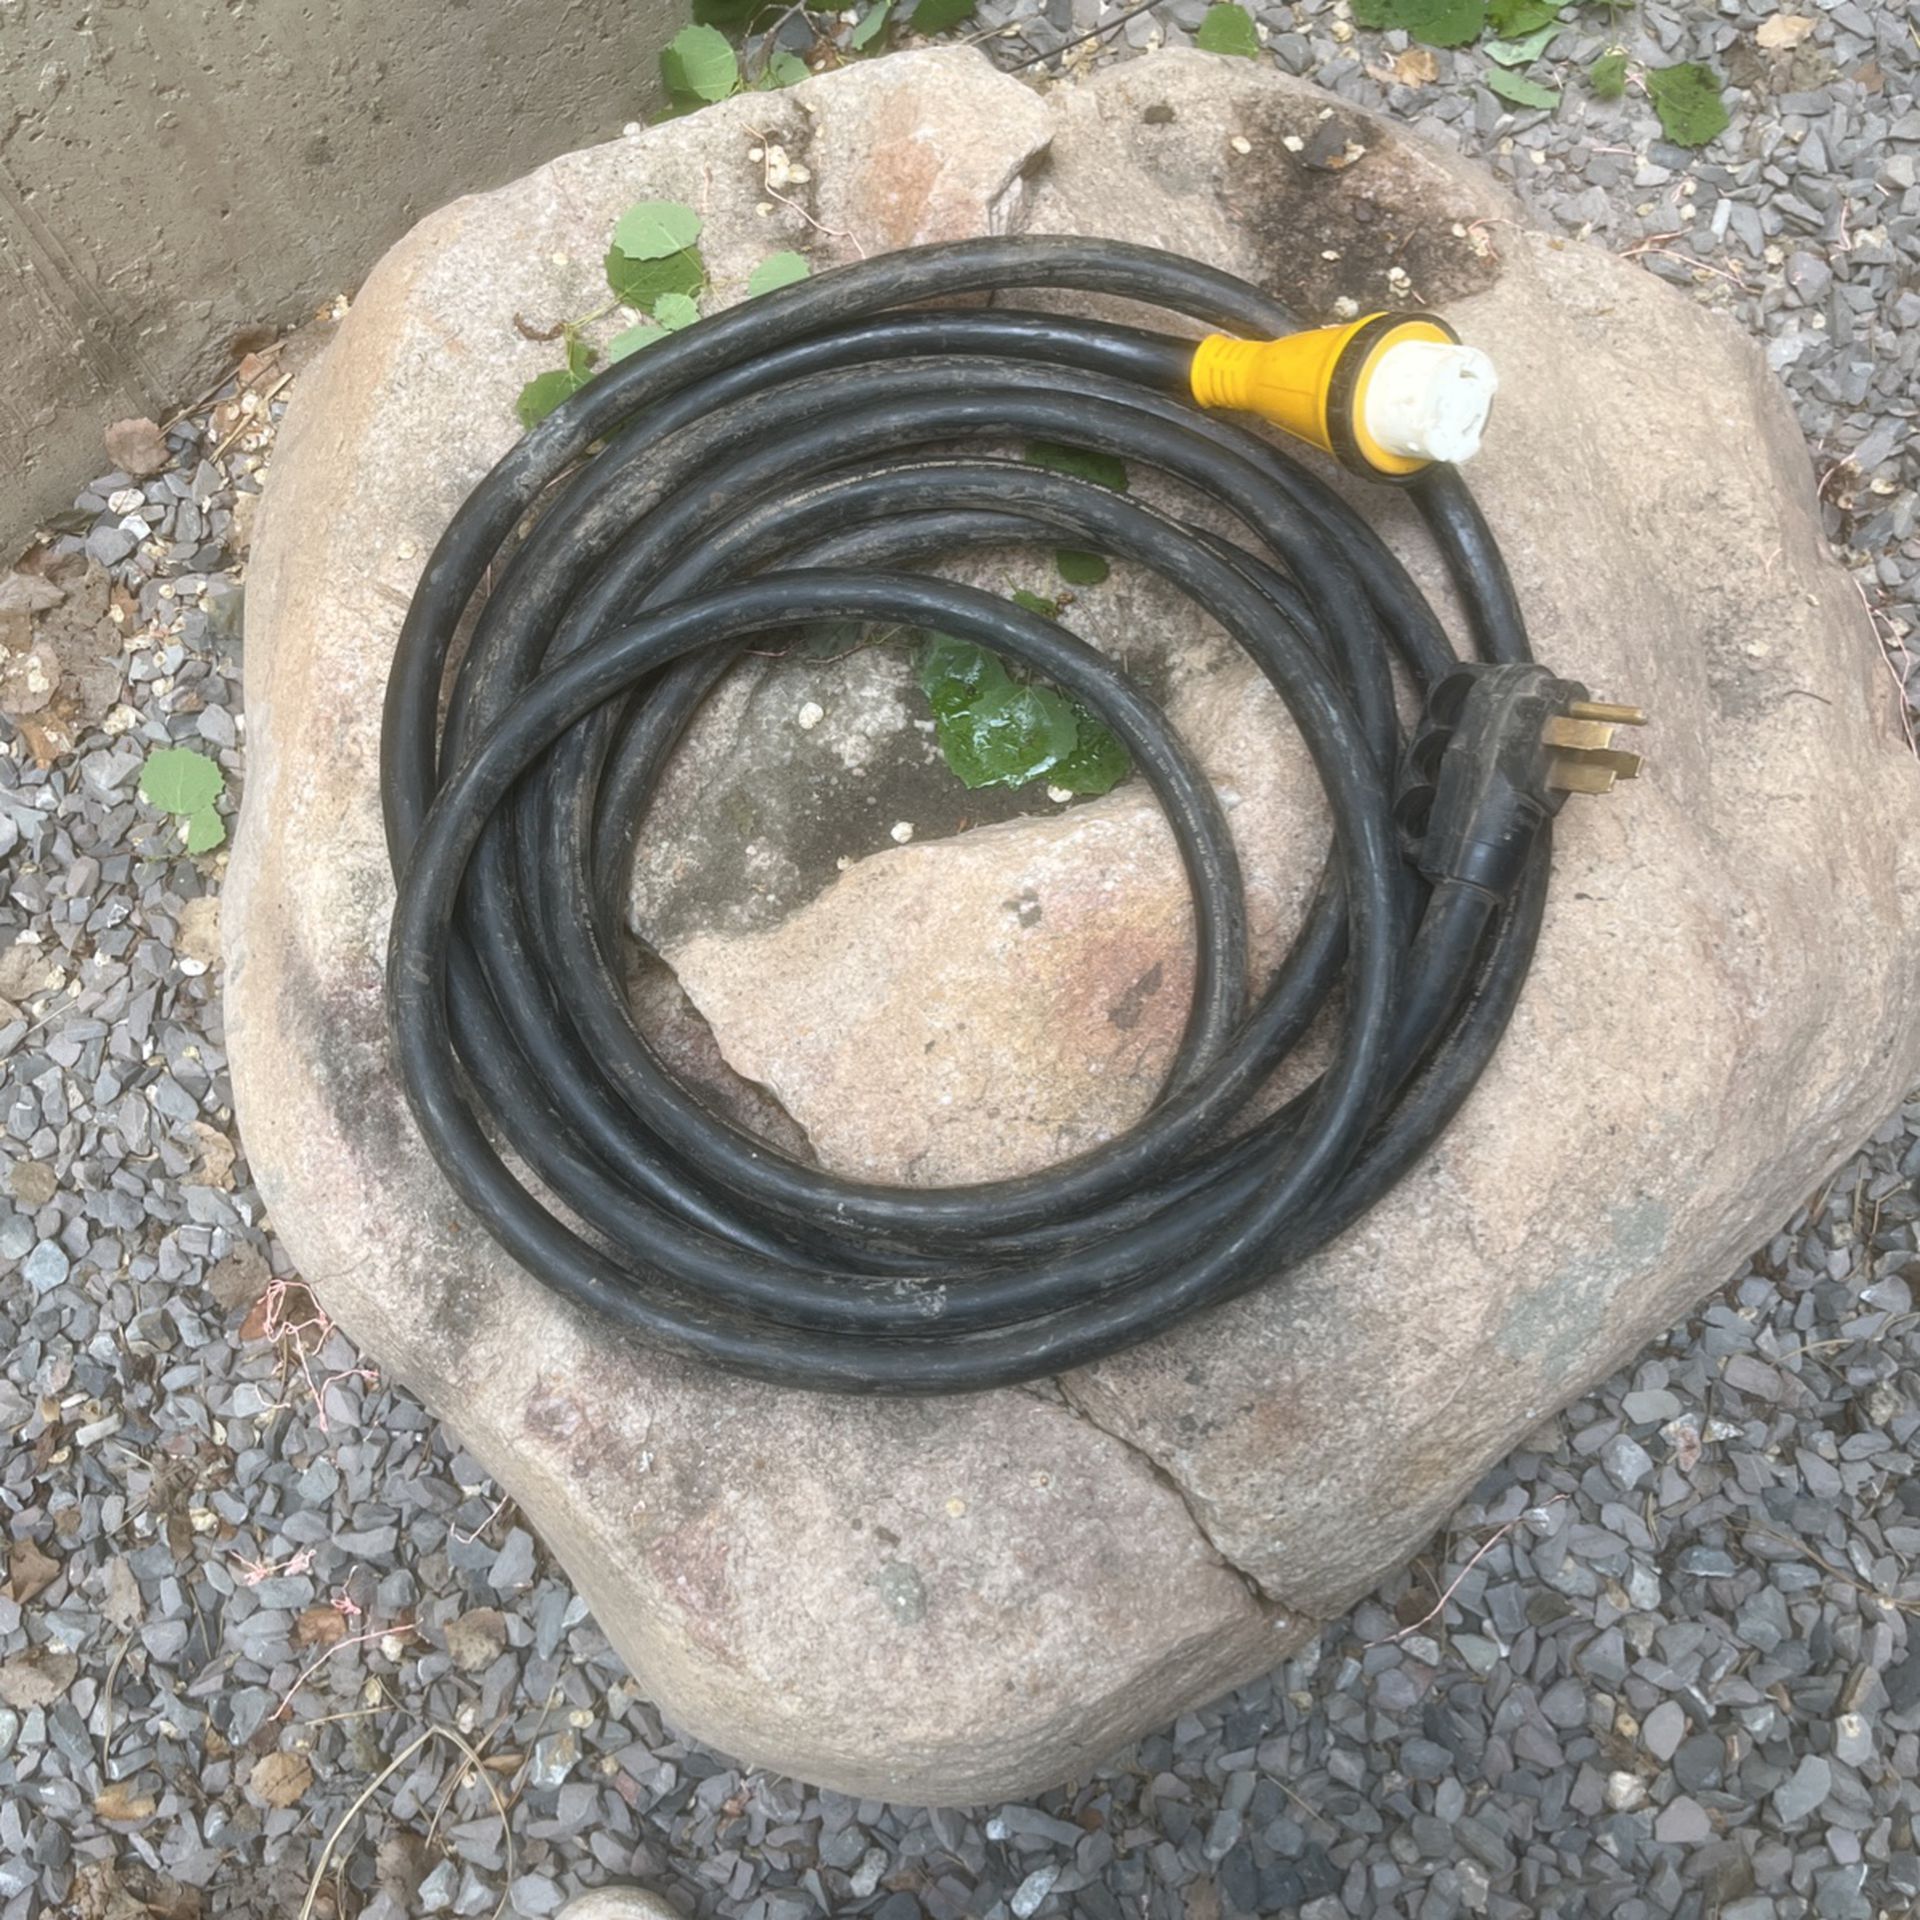 A Cable For A RV 5th Wheel Trailer 